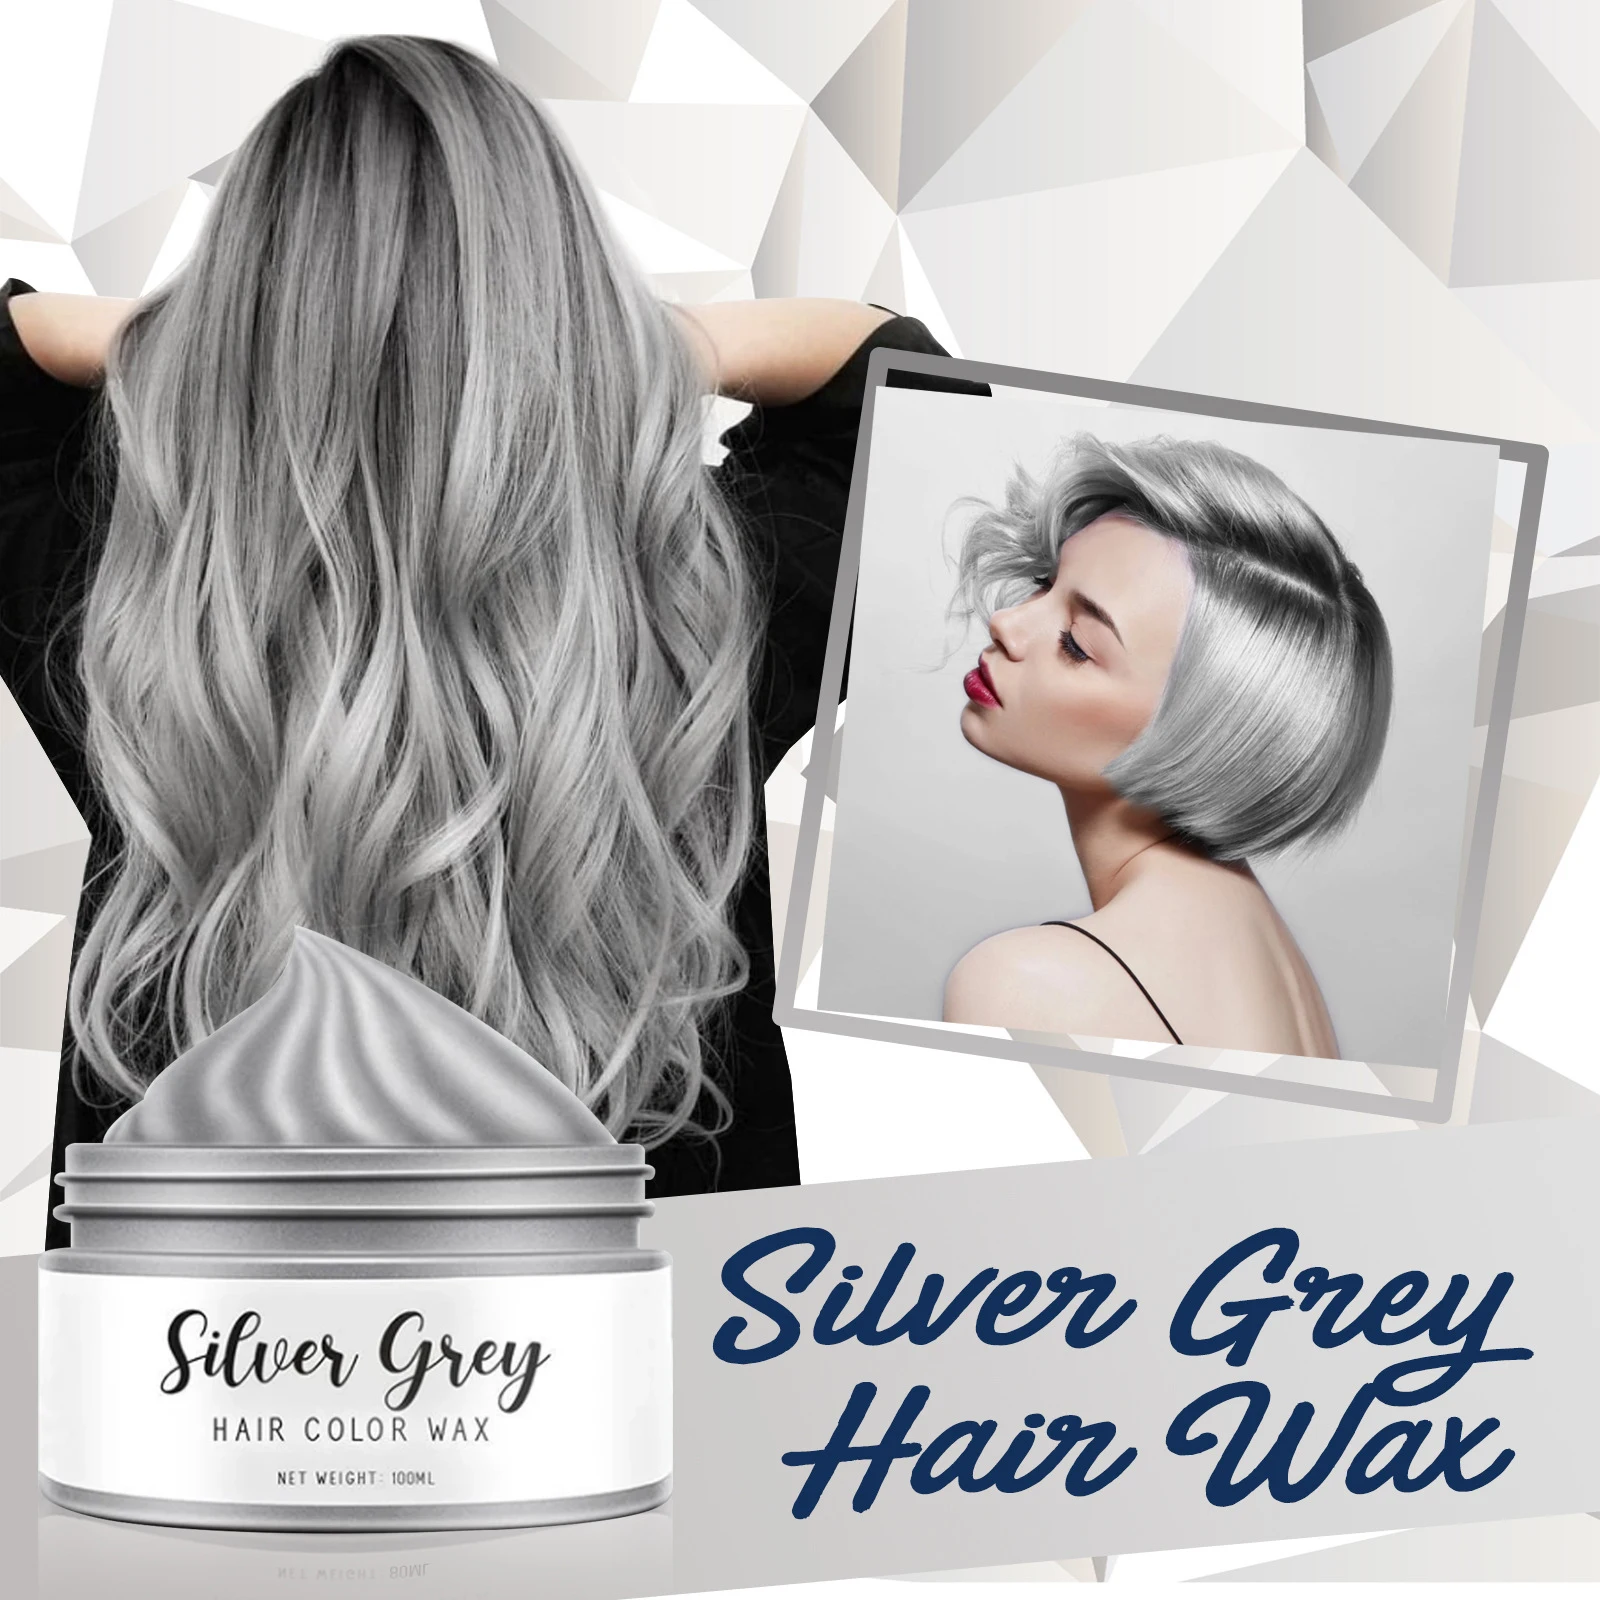 1/ Oz Silver Grey Hair Color Dye White Hair Dyes Wax Temporary Colors  Hair Beauty Care Hair Styling Gel Hairdressing Supplies _ - AliExpress  Mobile